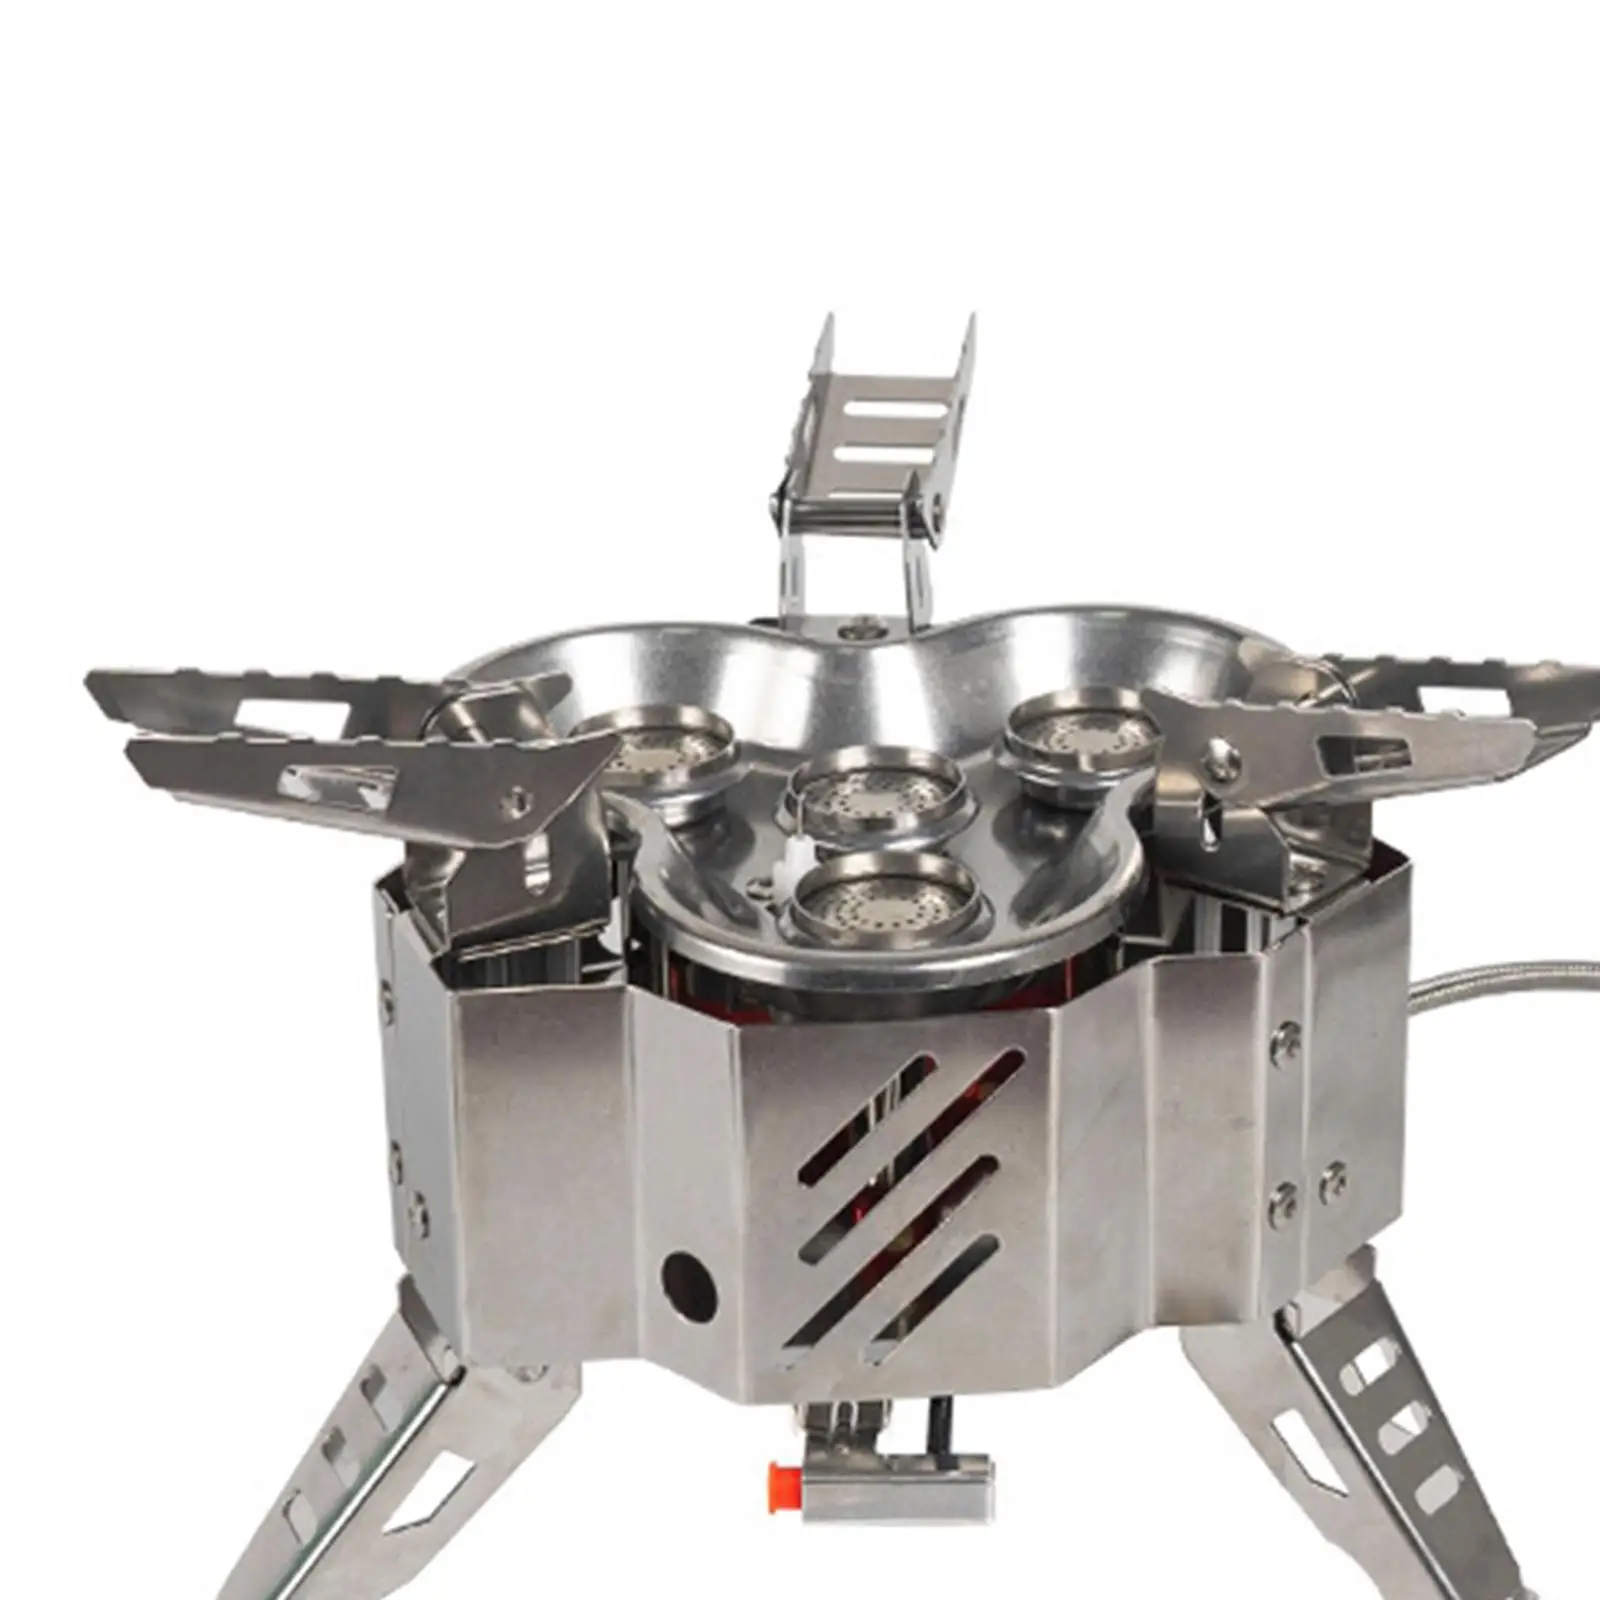 Portable Camping Gas Stove with Piezo Ignition Ultralight Windproof Camp Stove for Fishing Outdoor Picnic Backpacking Cooking